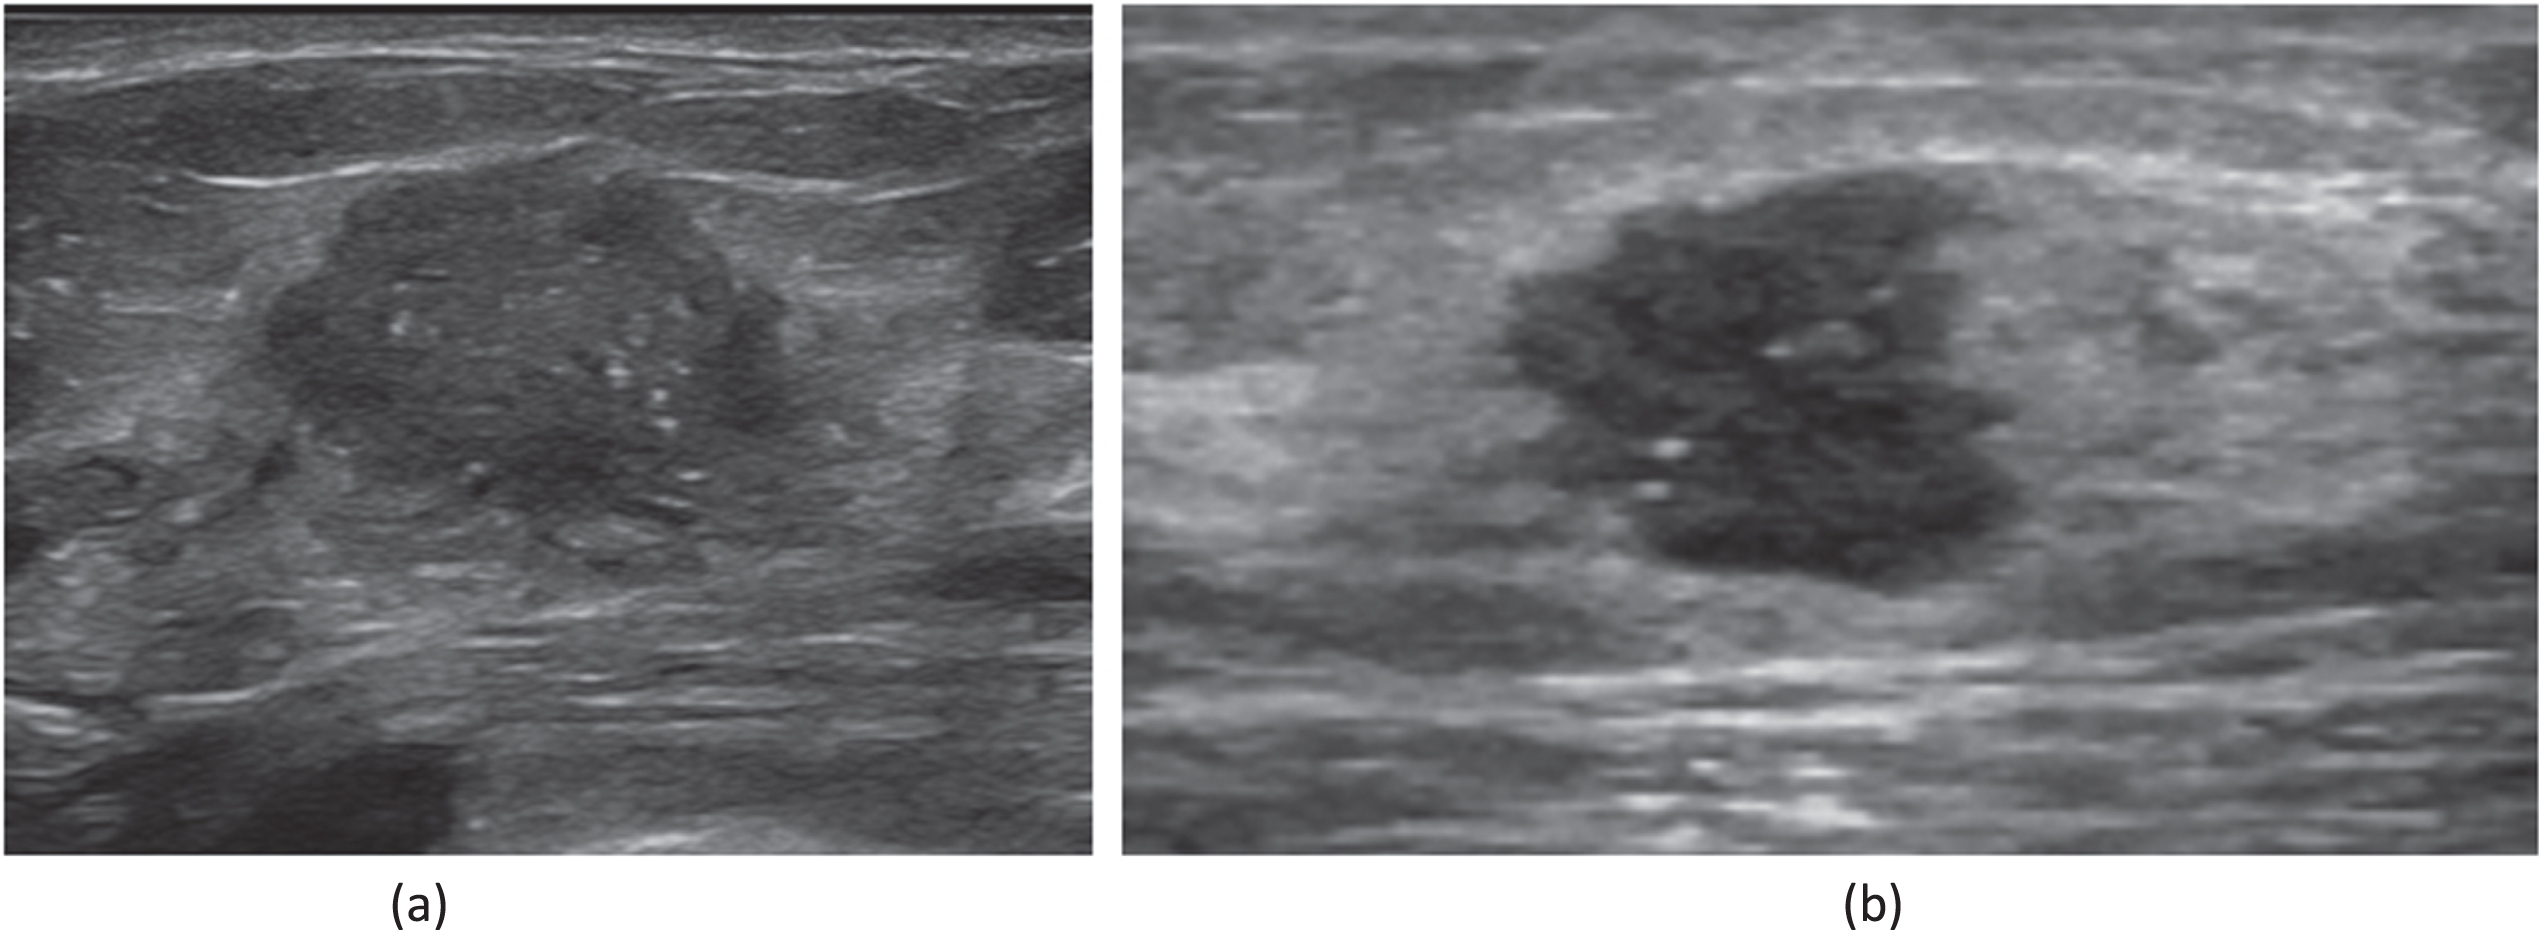 (a) A 45-year-old female patient who had been diagnosed with an invasive carcinoma in the left breast. Ultrasound of left breast showing a hypoechoic nodule with a maximum diameter of 20 mm with ill defined margins, Internal microcalcifications are seen within the nodule. The patient had left axillary lymph node metastasis. Immunohistochemistry showed that ER(+80%), PR(+80%), AR(+80%), HER2(2+), CK5/6(-), P53(+30%), Ki67(+30%). FISH showed that amplification of the HER-2 gene was negative. (b) A 59-year-old female patient who had been diagnosed with a non-special invasive carcinoma grade II in the left breast. Ultrasound of left breast showing a hypoechoic nodule with a maximum diameter of 12 mm with ill defined margins, Internal microcalcifications are seen within the nodule. The patient had left axillary lymph node metastasis. Immunohistochemistry showed that ER(+90%), PR(+10%), HER2(1+), CK5/6(-), P53(+5%), AR(+20%), Ki67(+30%).